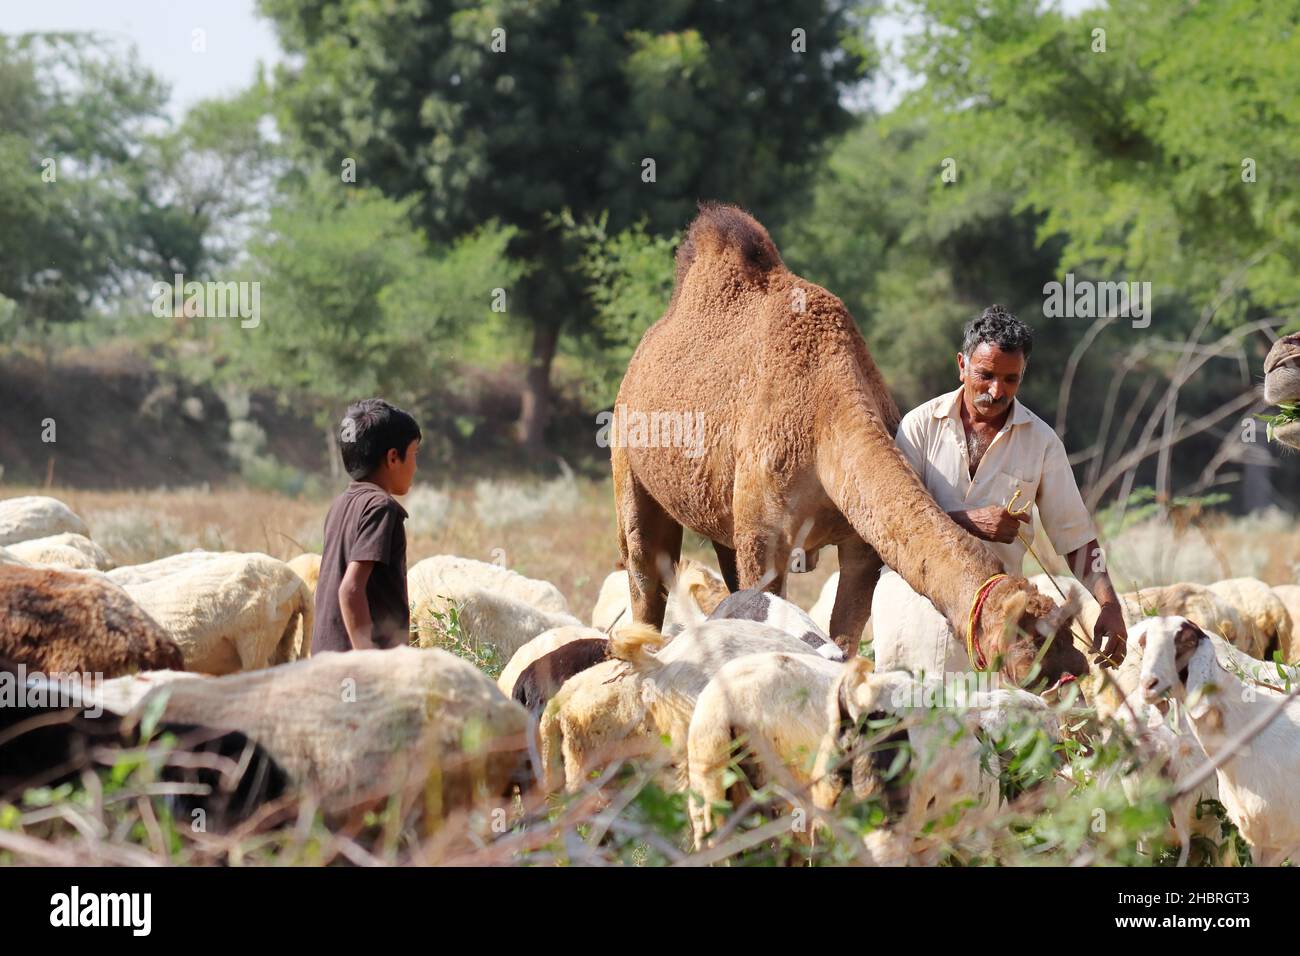 Pali Rajasthan , India -October 30 , 2021. Close-up of Female camel eating plant leaves with a flock of goats and goat farmers working together, Raja Stock Photo